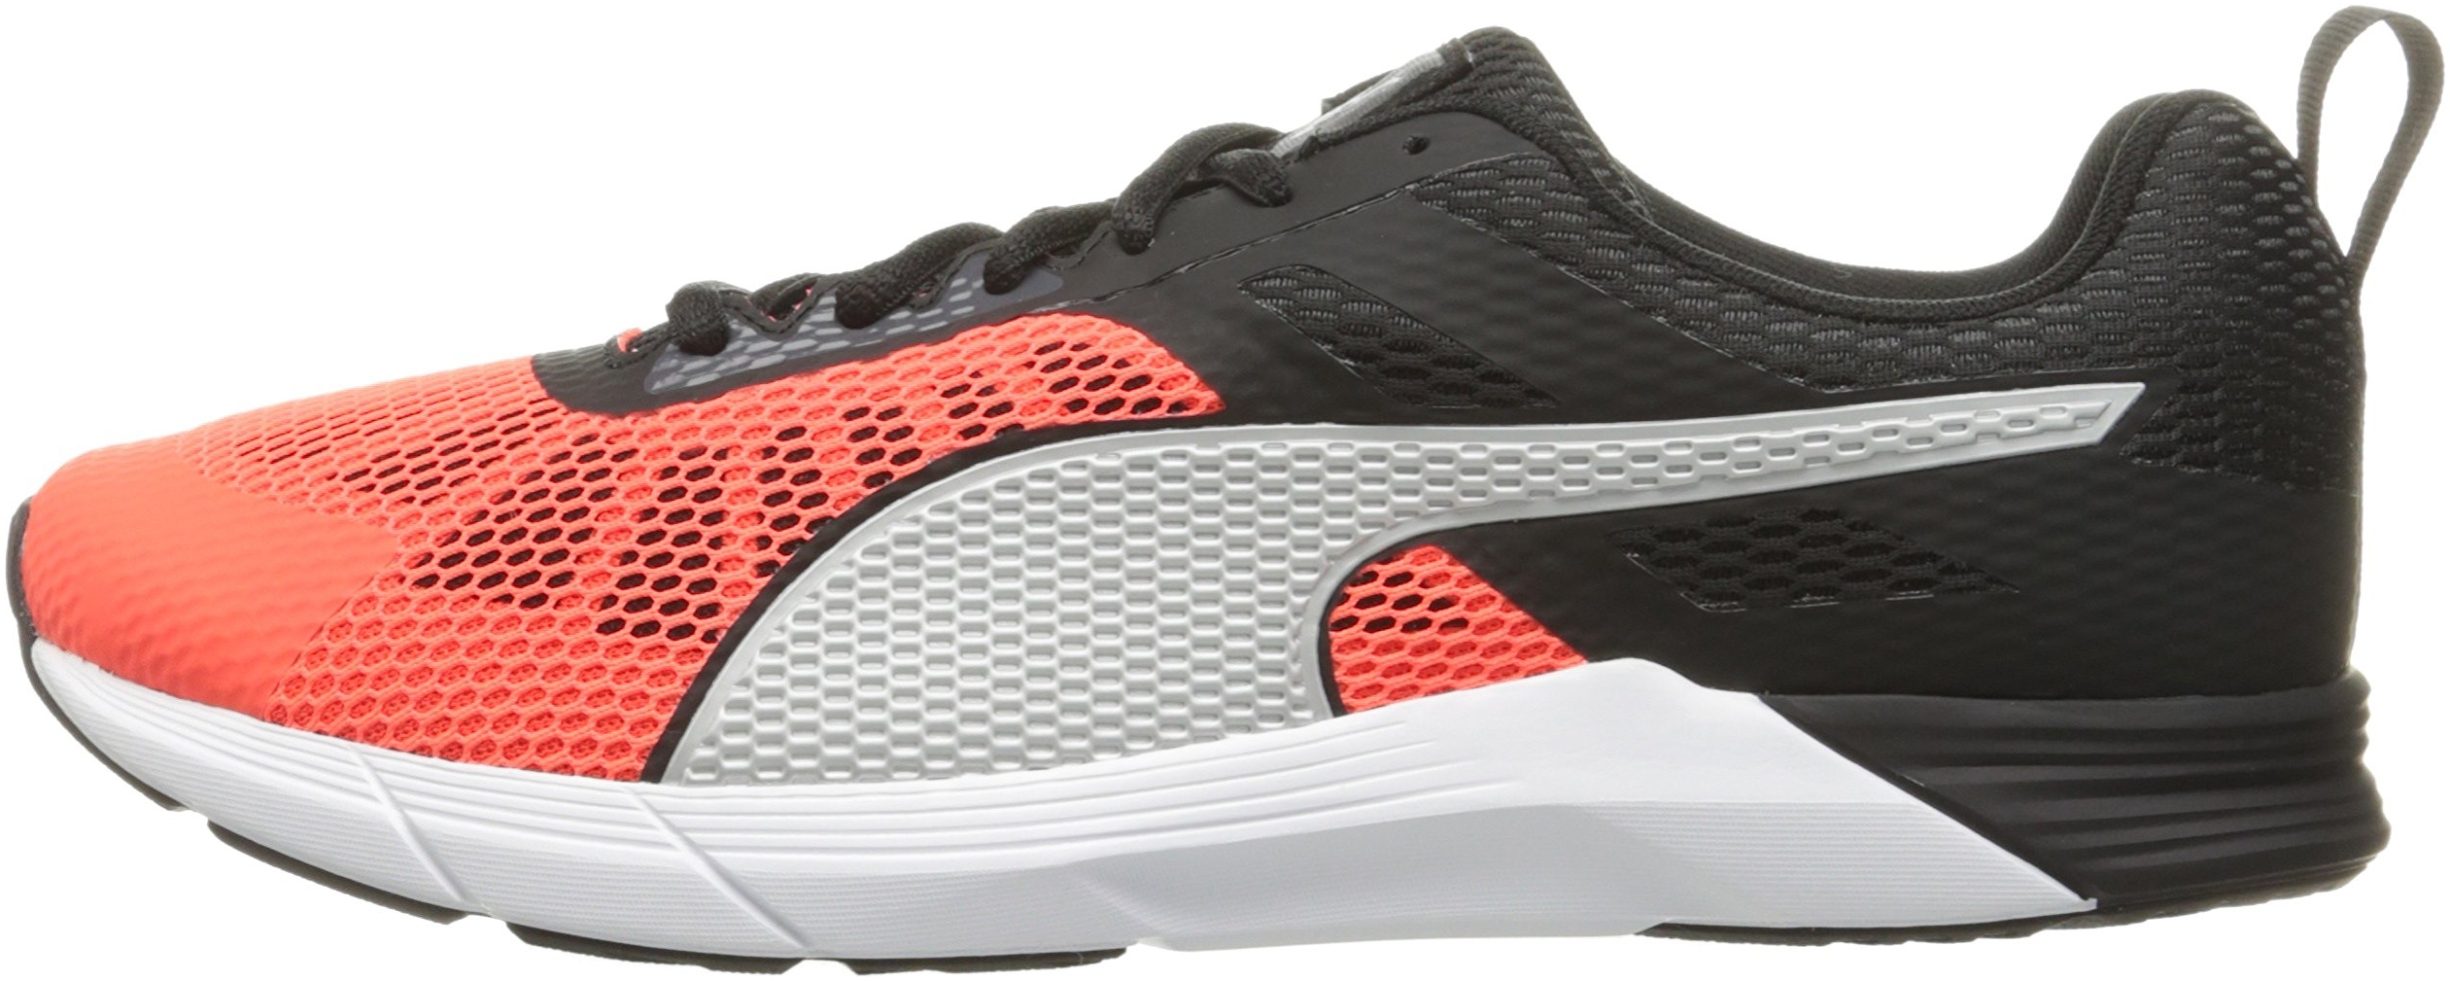 Only $35 + Review of Puma Propel 